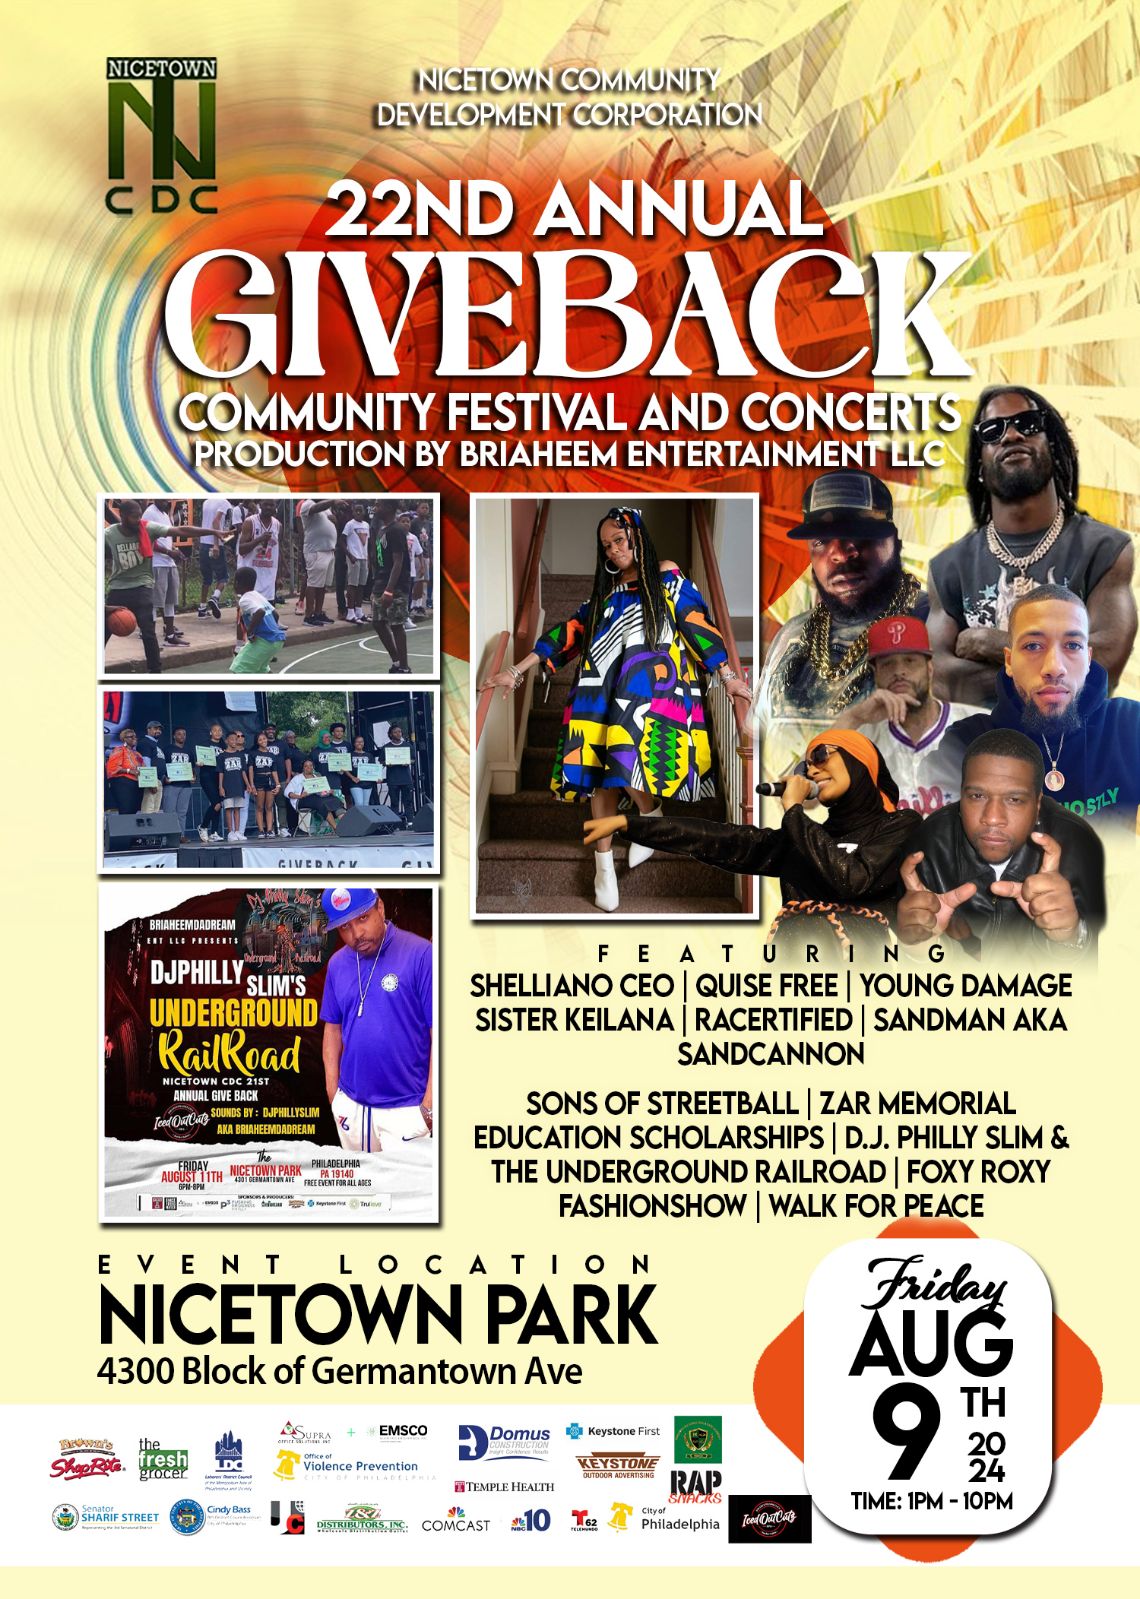 22nd Annual Give Back Community Festival and Concerts - August 9th